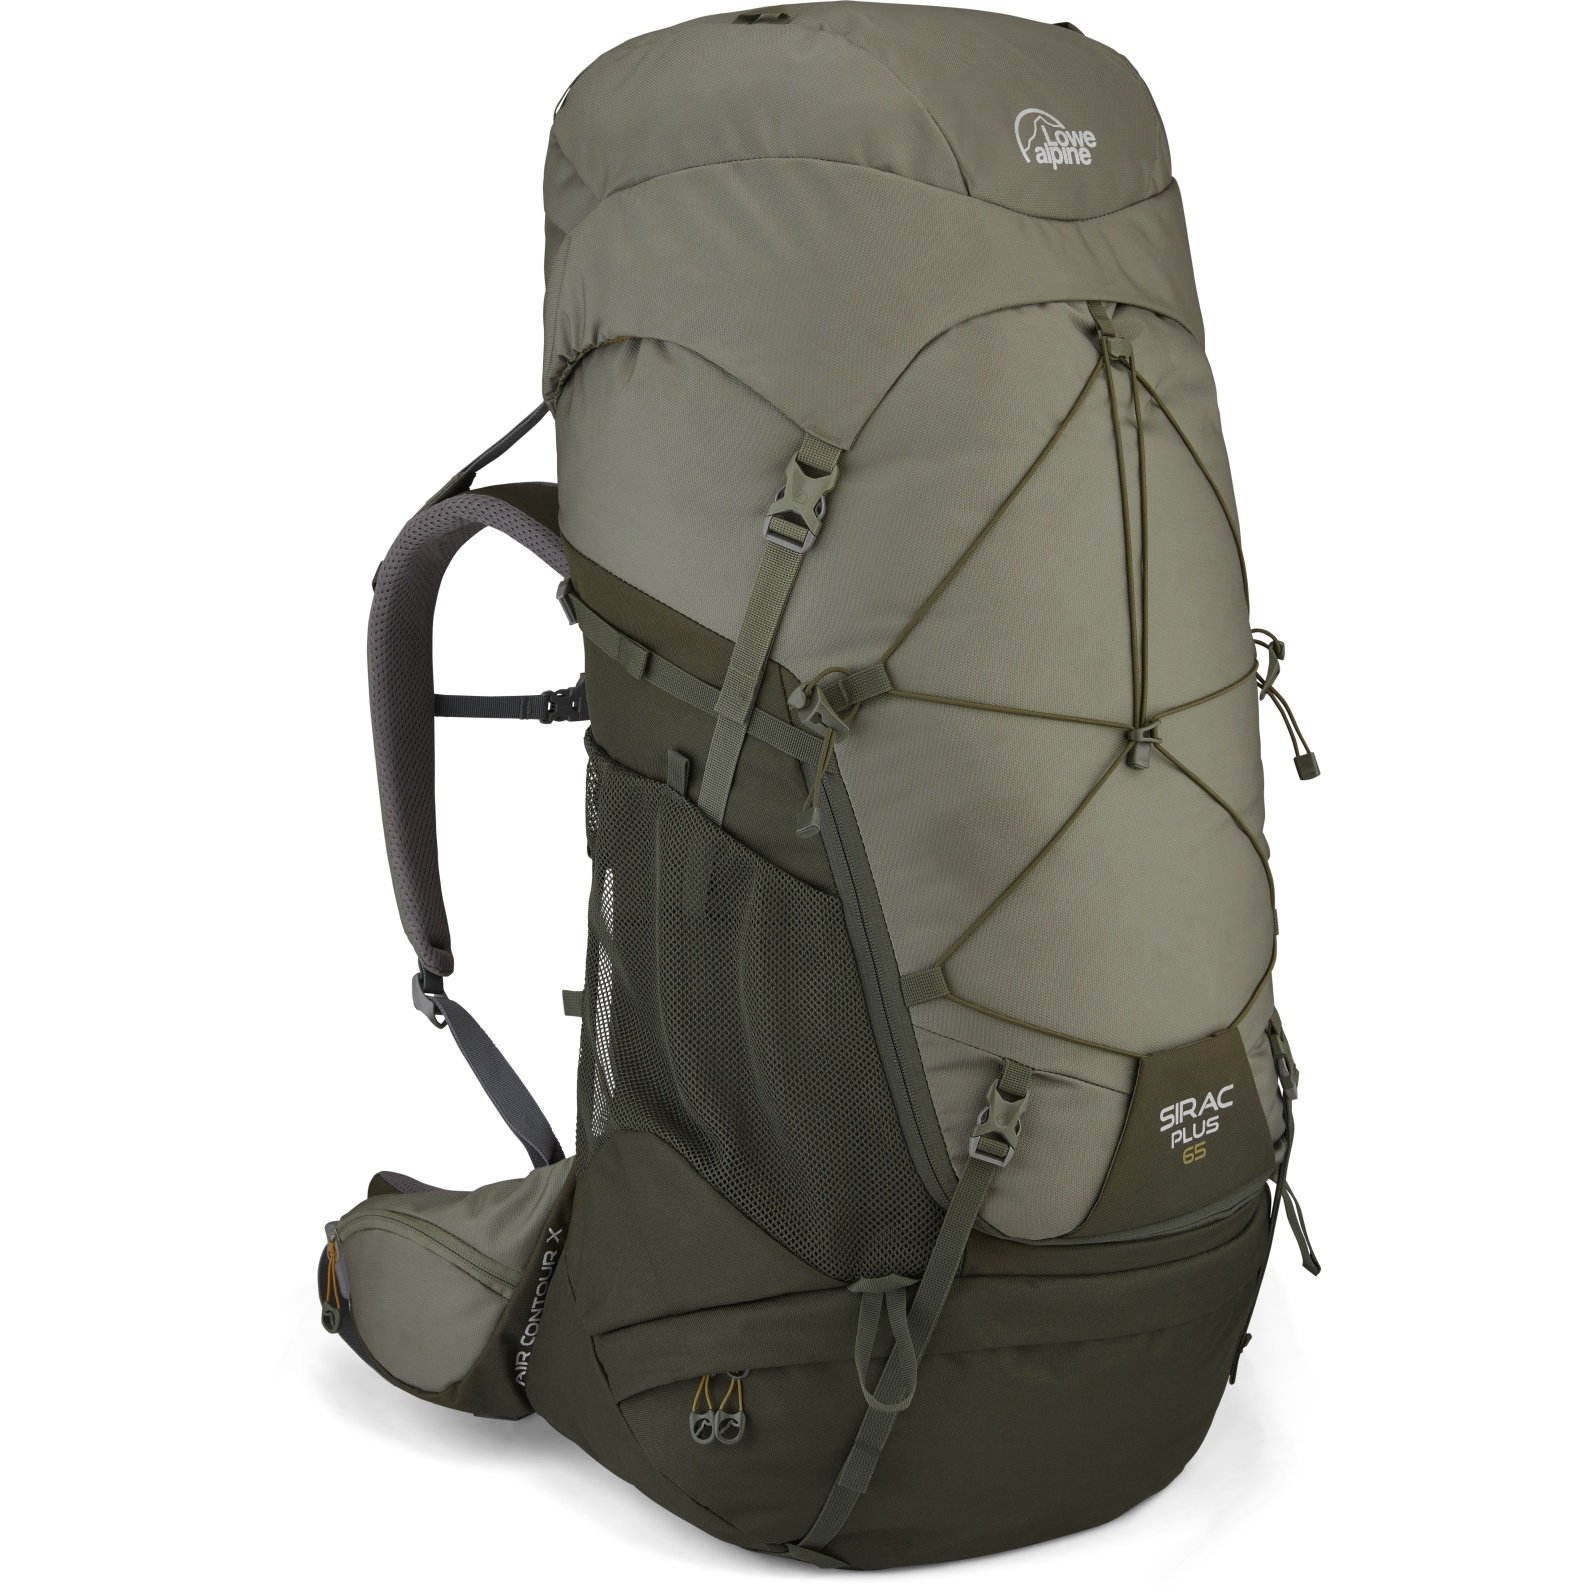 Picture of Lowe Alpine Sirac Plus 65L Backpack - M/L - Light Khaki/Army